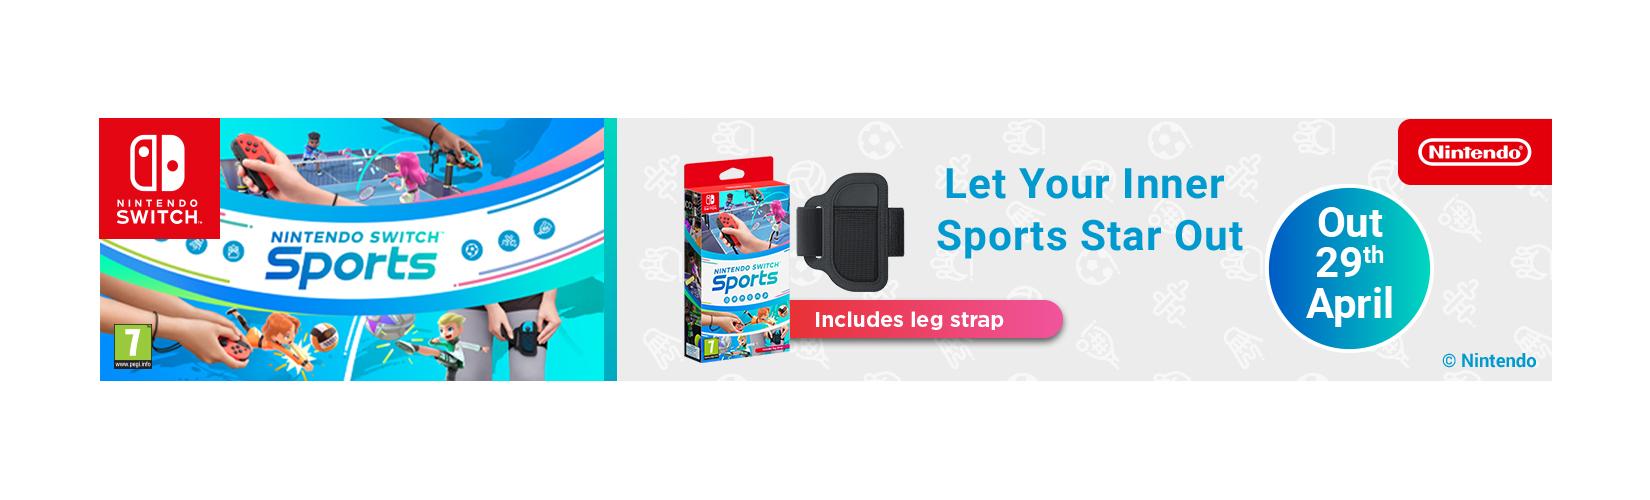 Nintendo. Let  your inner sports star out. Includes leg strap. Out 29th April.